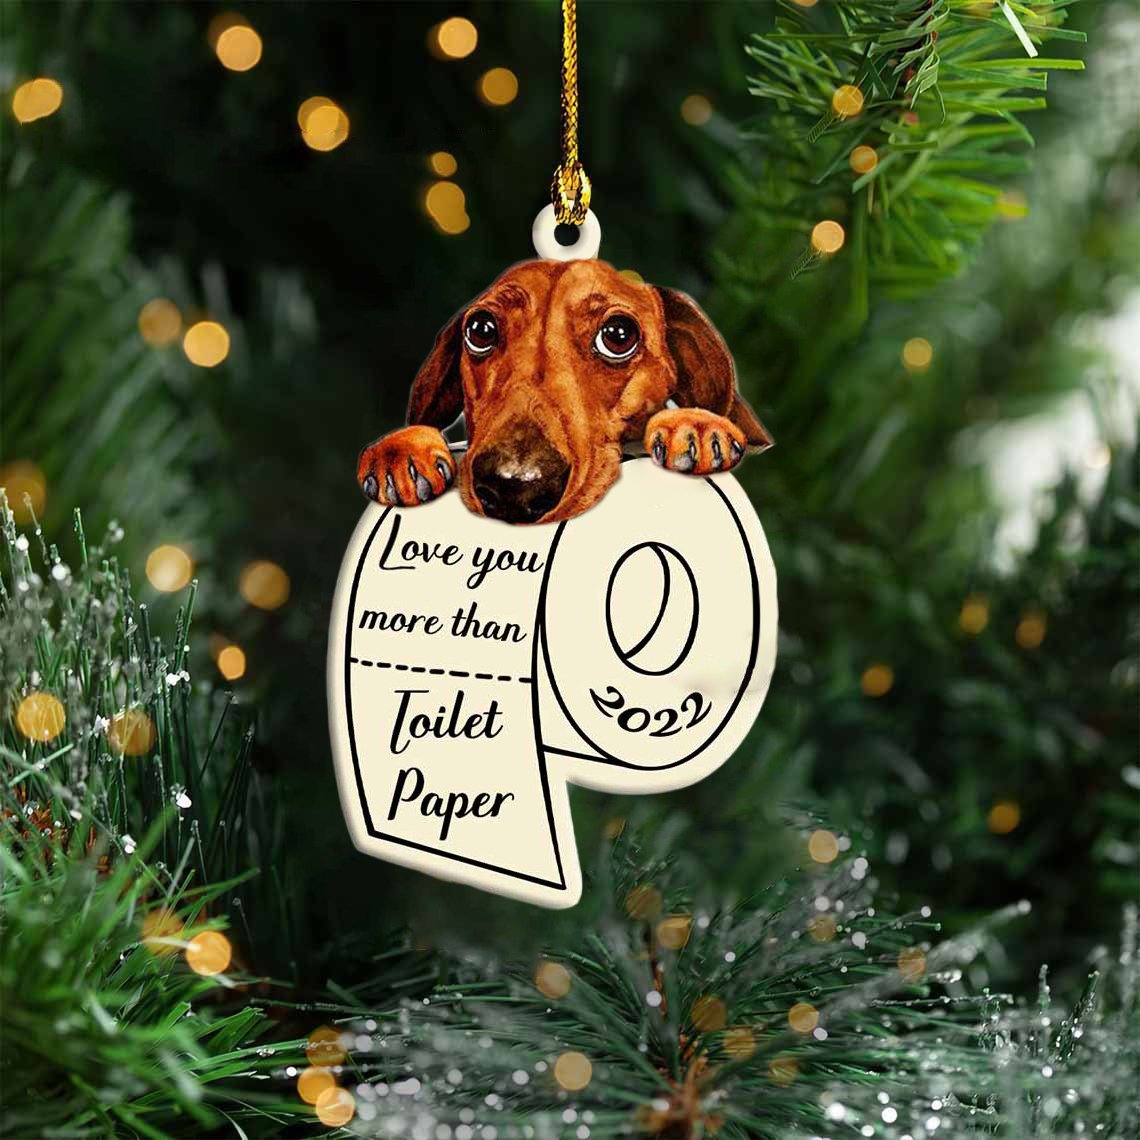 Dachshund Love You More Than Toilet Paper 2022 Hanging Ornament